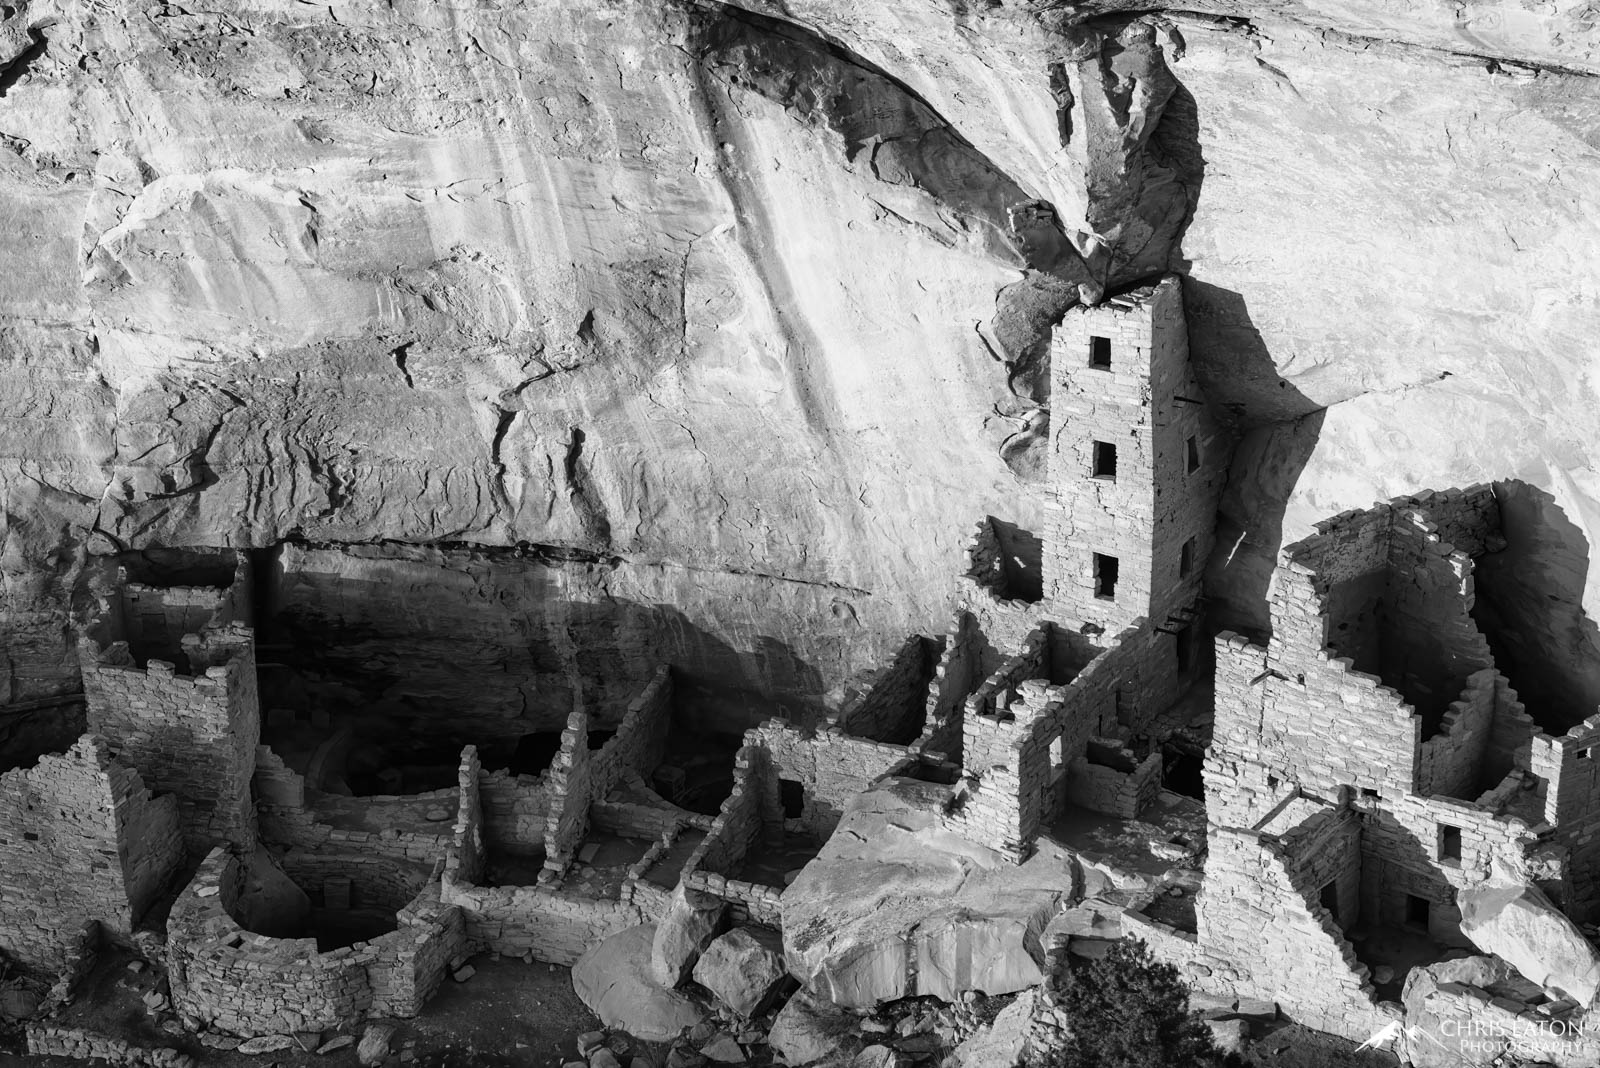 Around 1190 C.E., the inhabitants of the of Mesa Verde National Park region moved from pueblos on the mesa top to living in cliff...